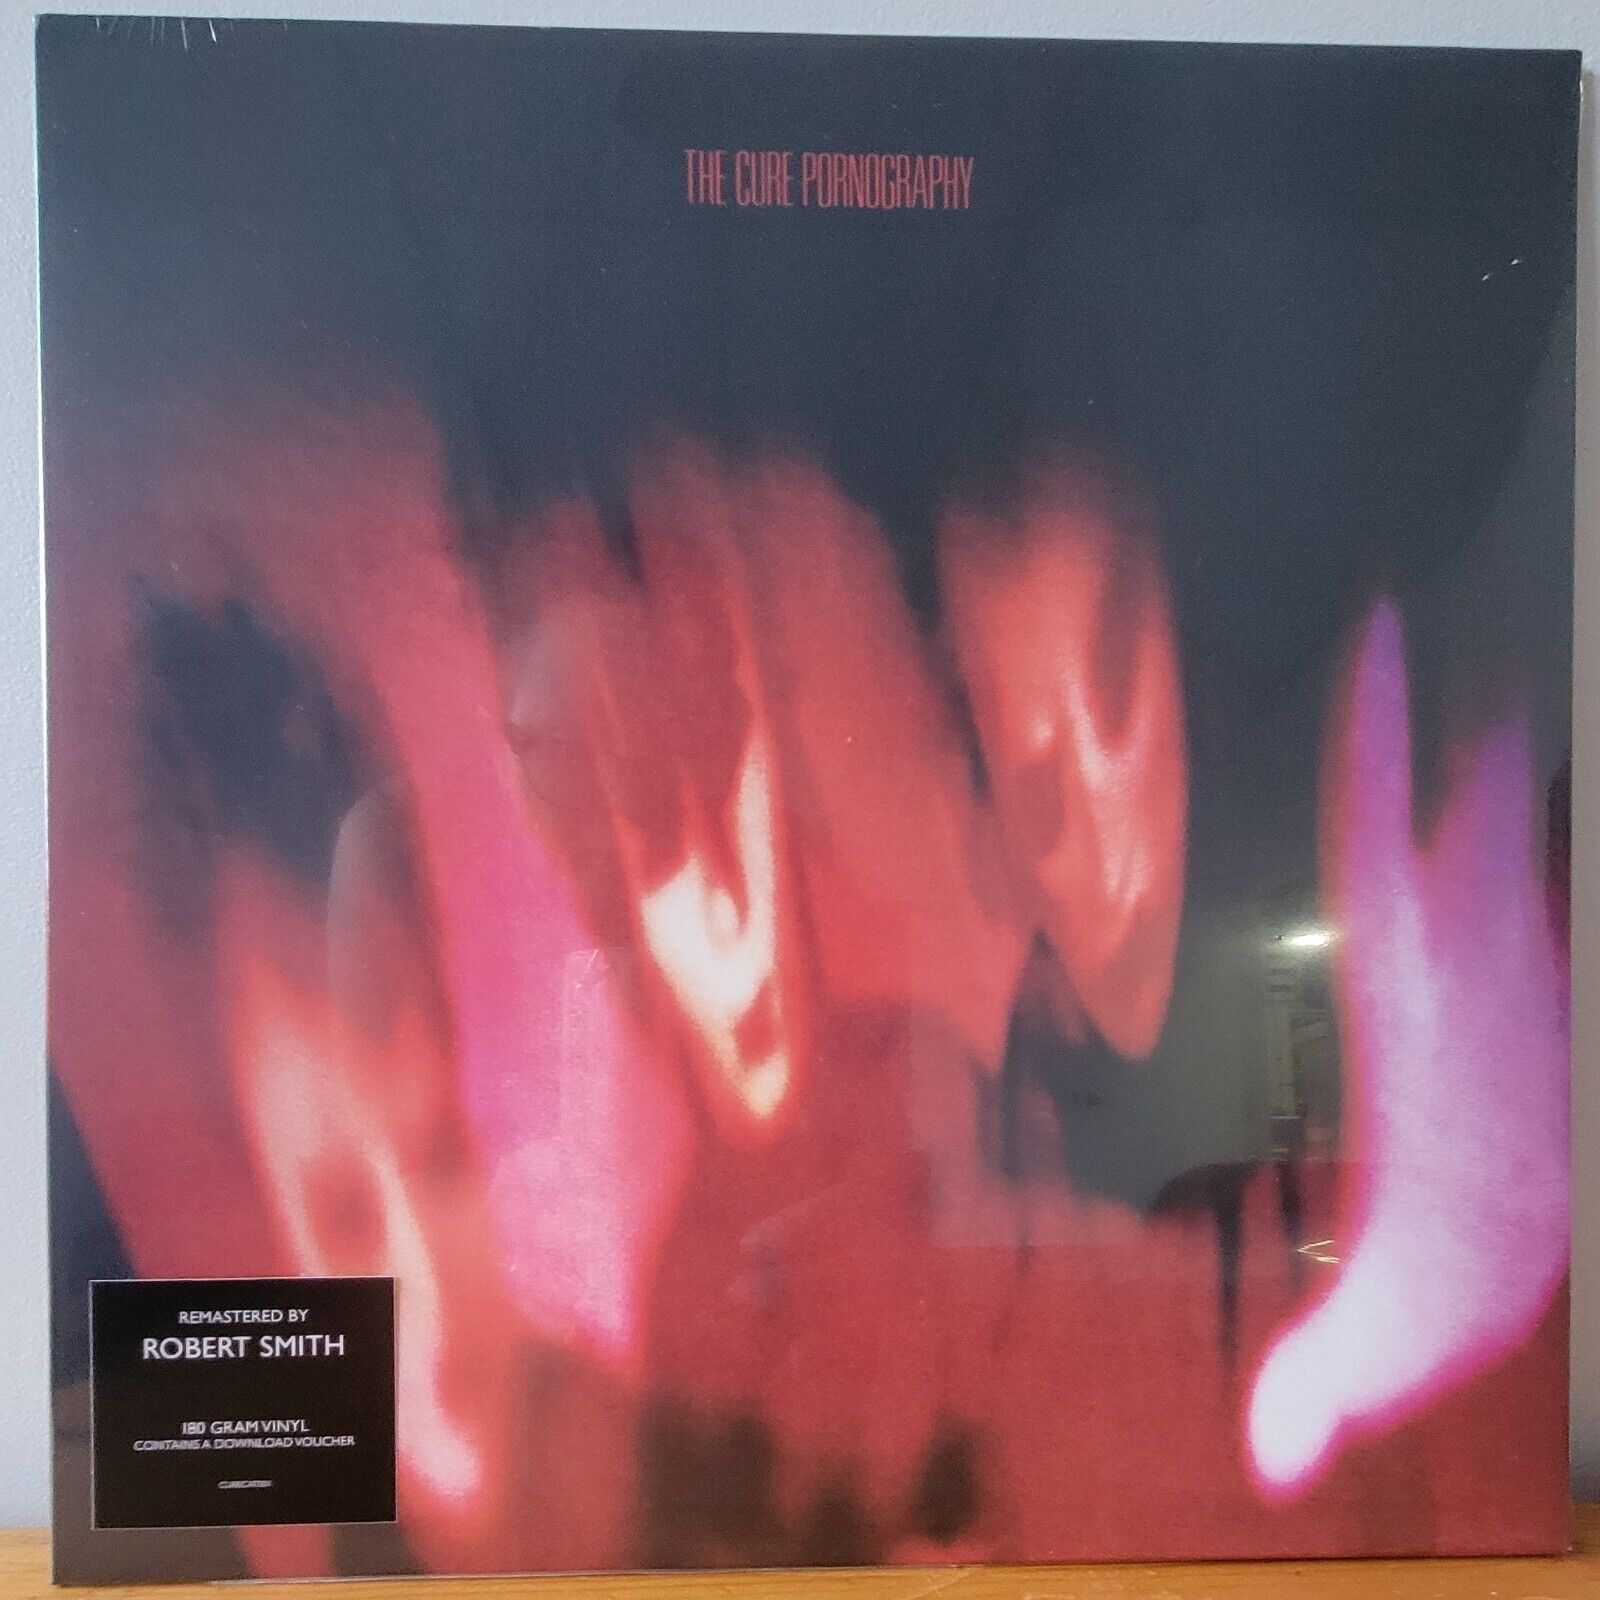 Pornography - Remastered 180-Gram Black Vinyl by The Cure Goth Rock New Wave